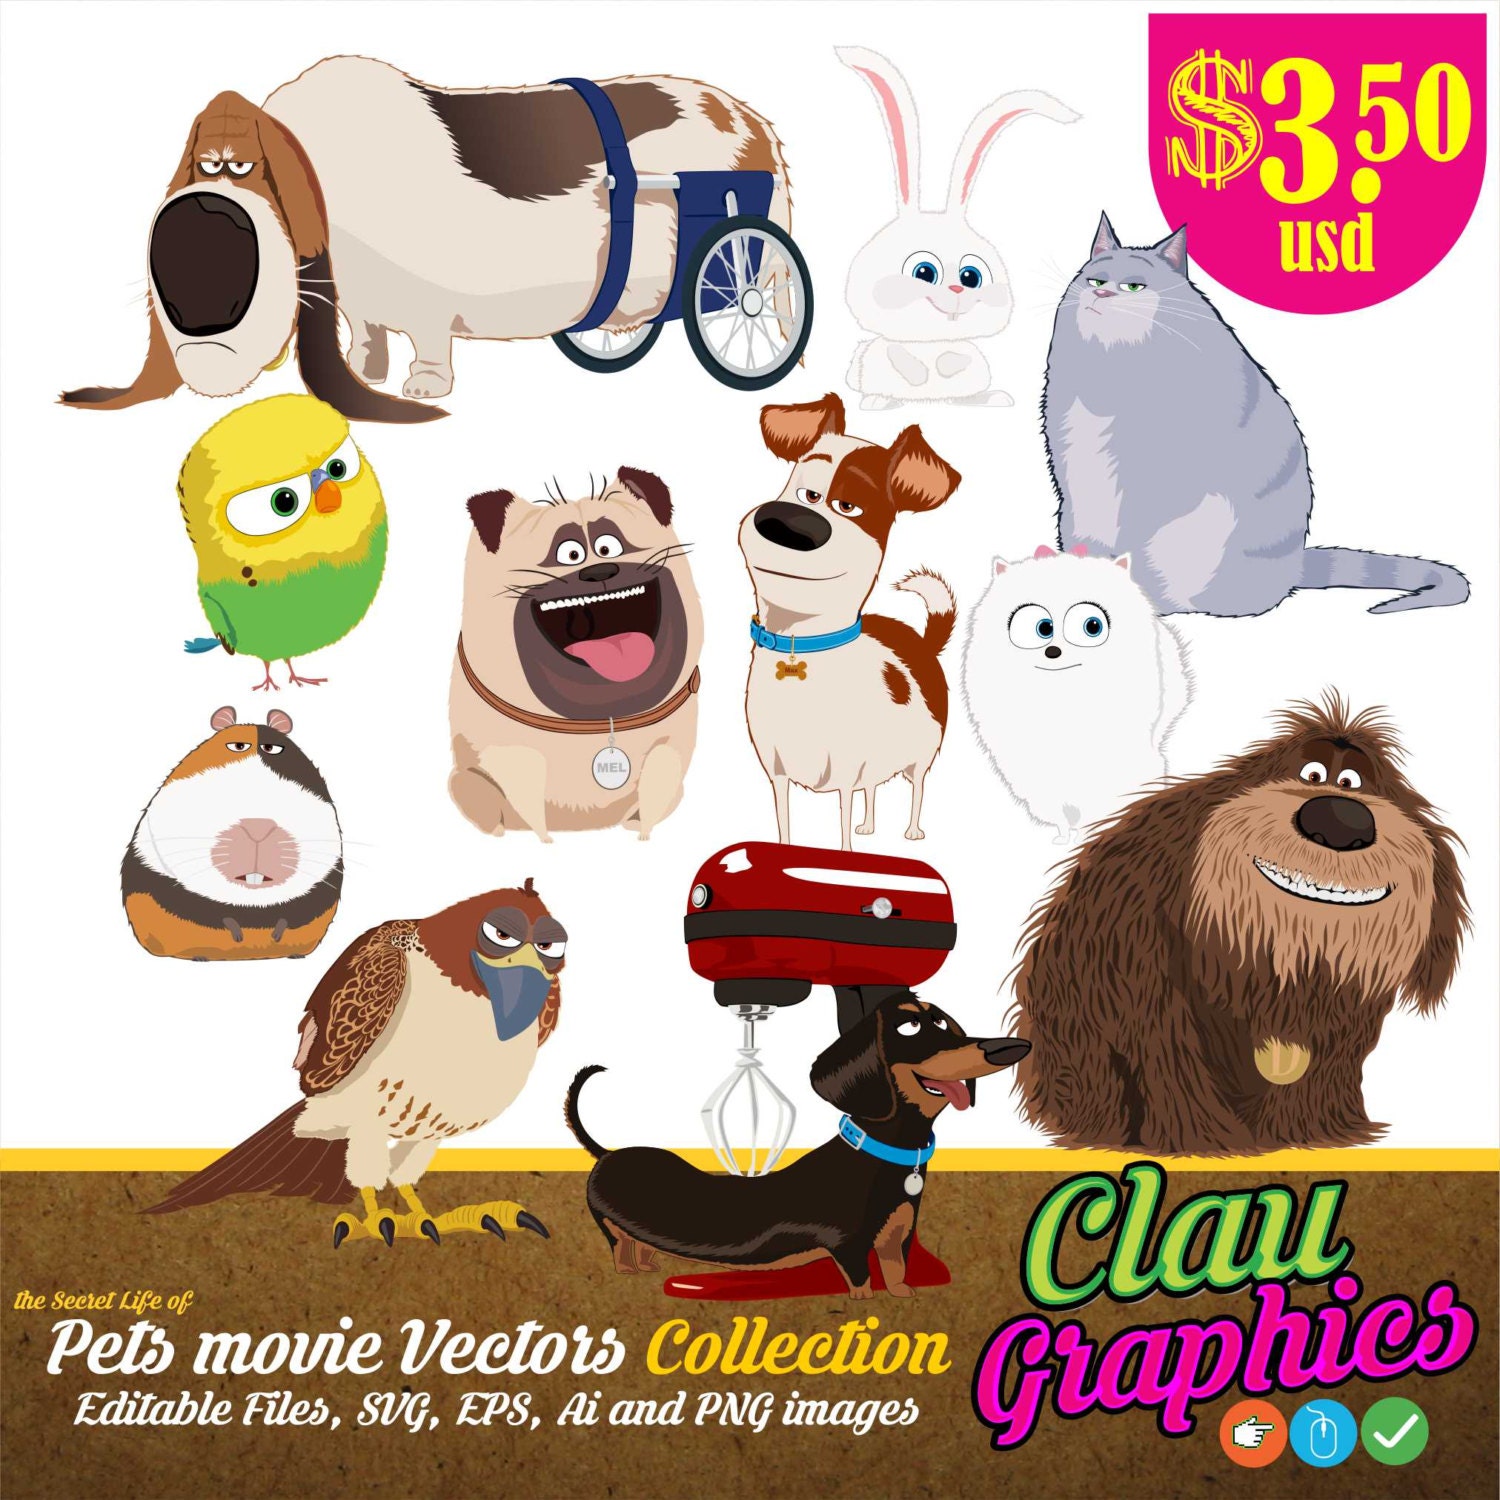 The Secret Life of Pets digital collection Receive the